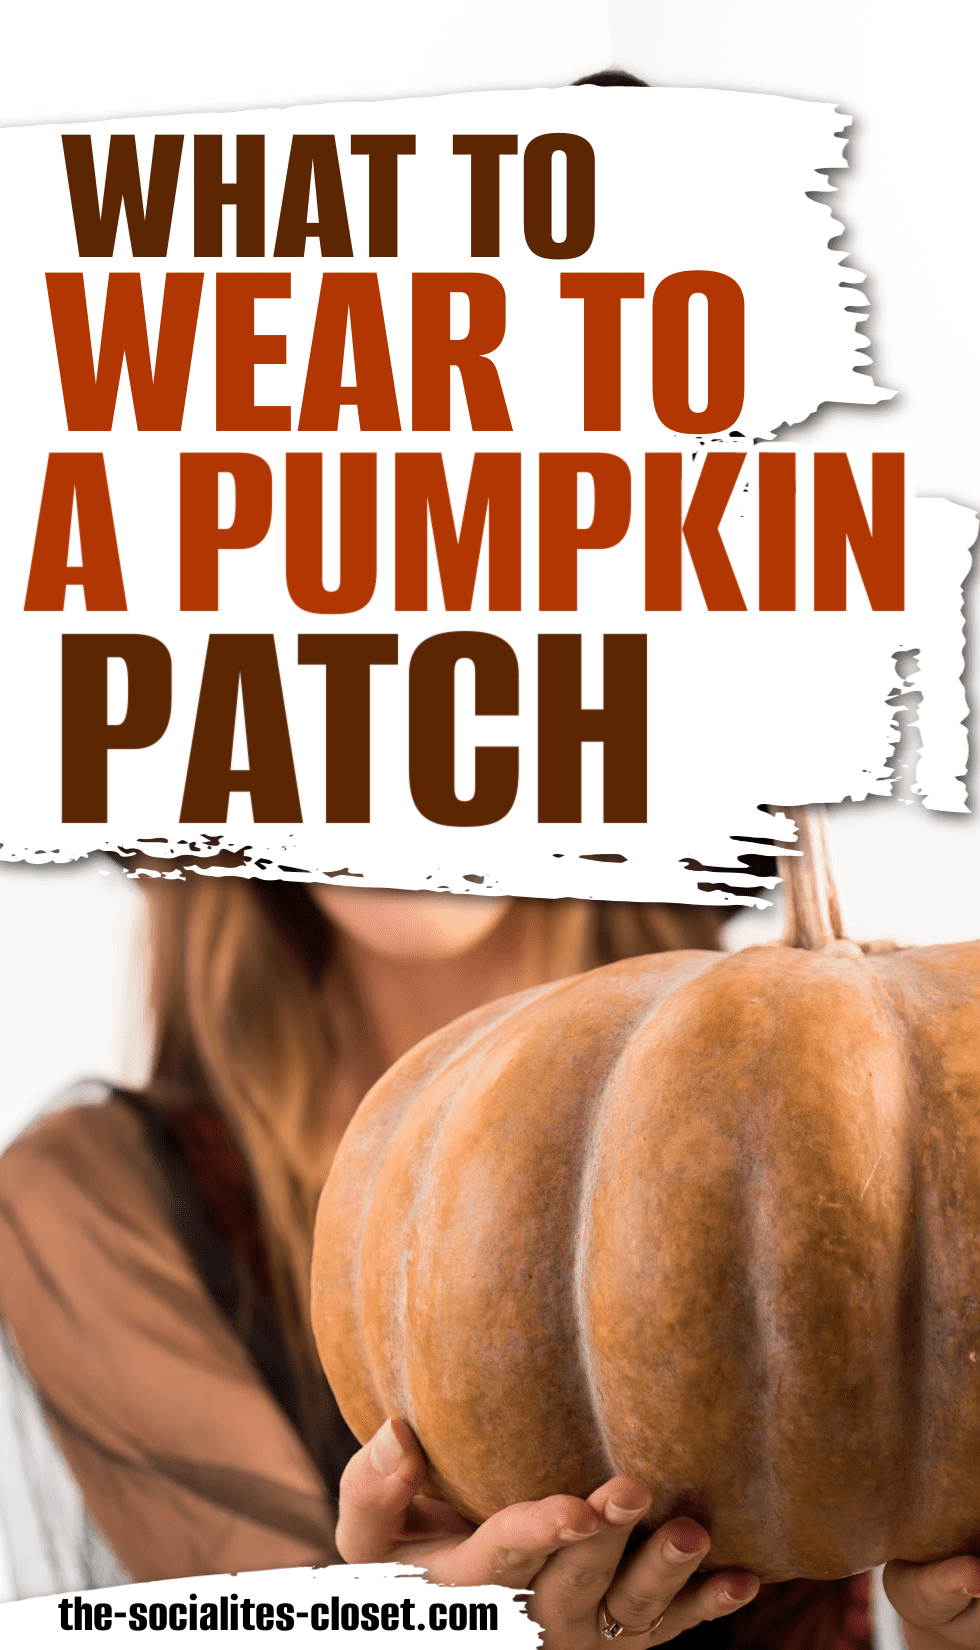 If you’re wondering what to wear to a pumpkin patch, check out these cute pumpkin patch ideas to wear when you go pumpkin picking.